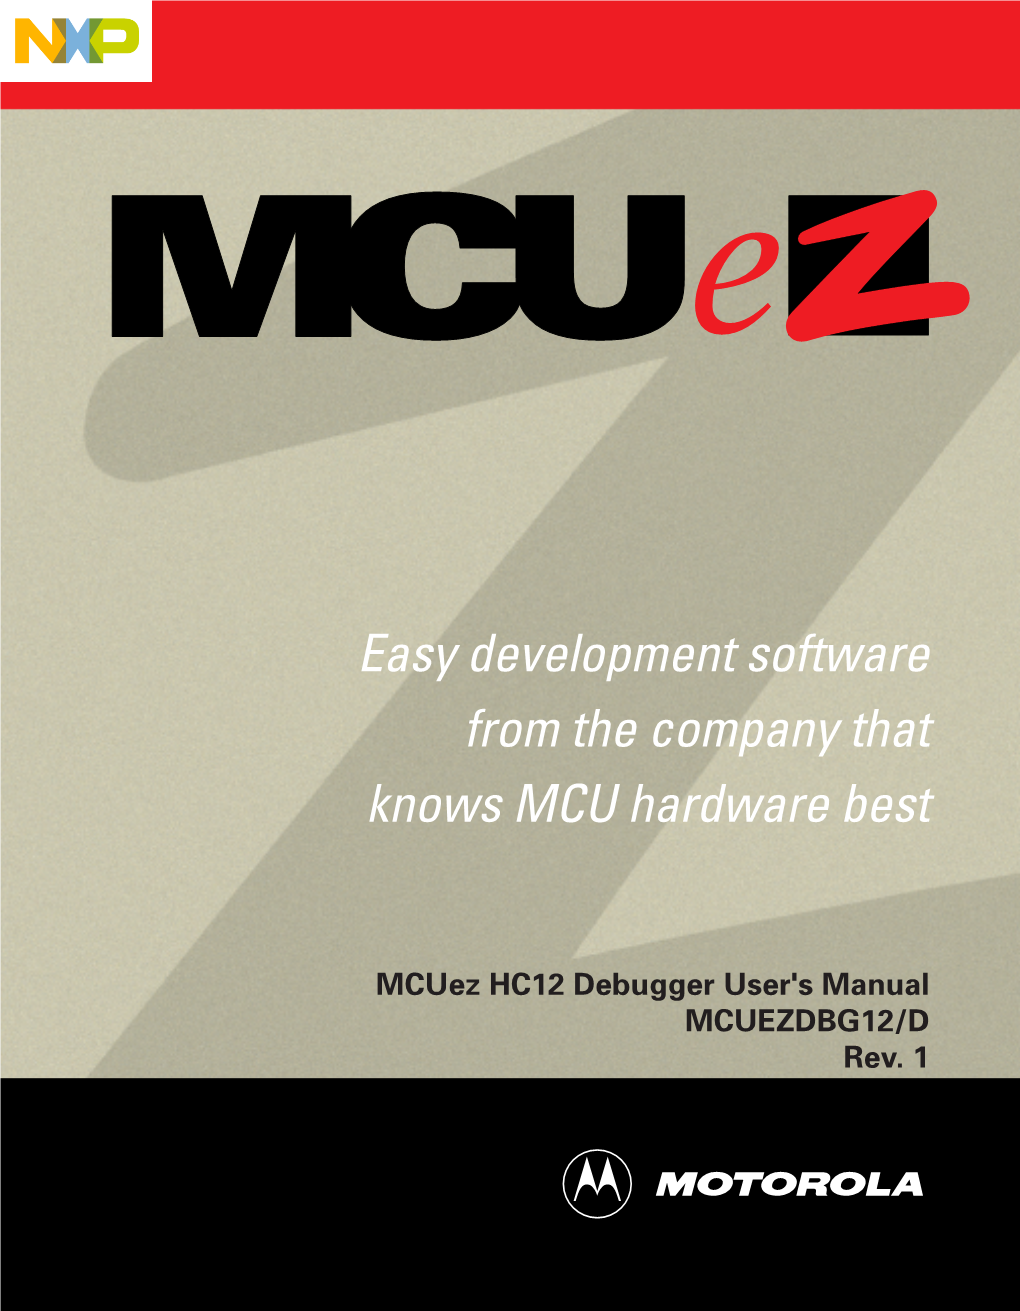 Easy Development Software from the Company That Knows MCU Hardware Best